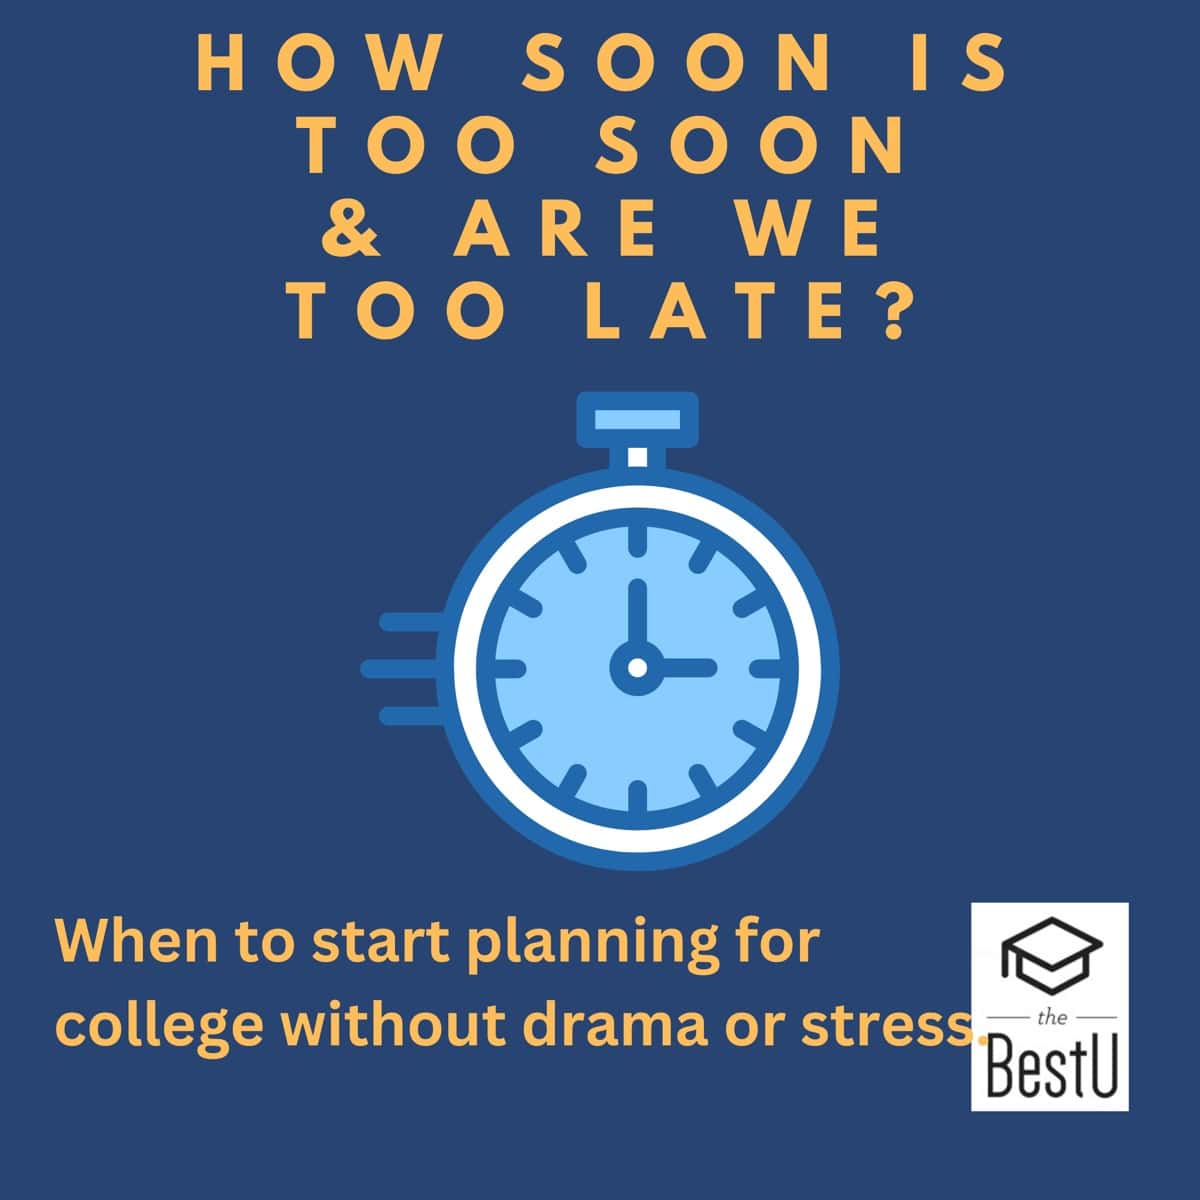 When to start planning for college